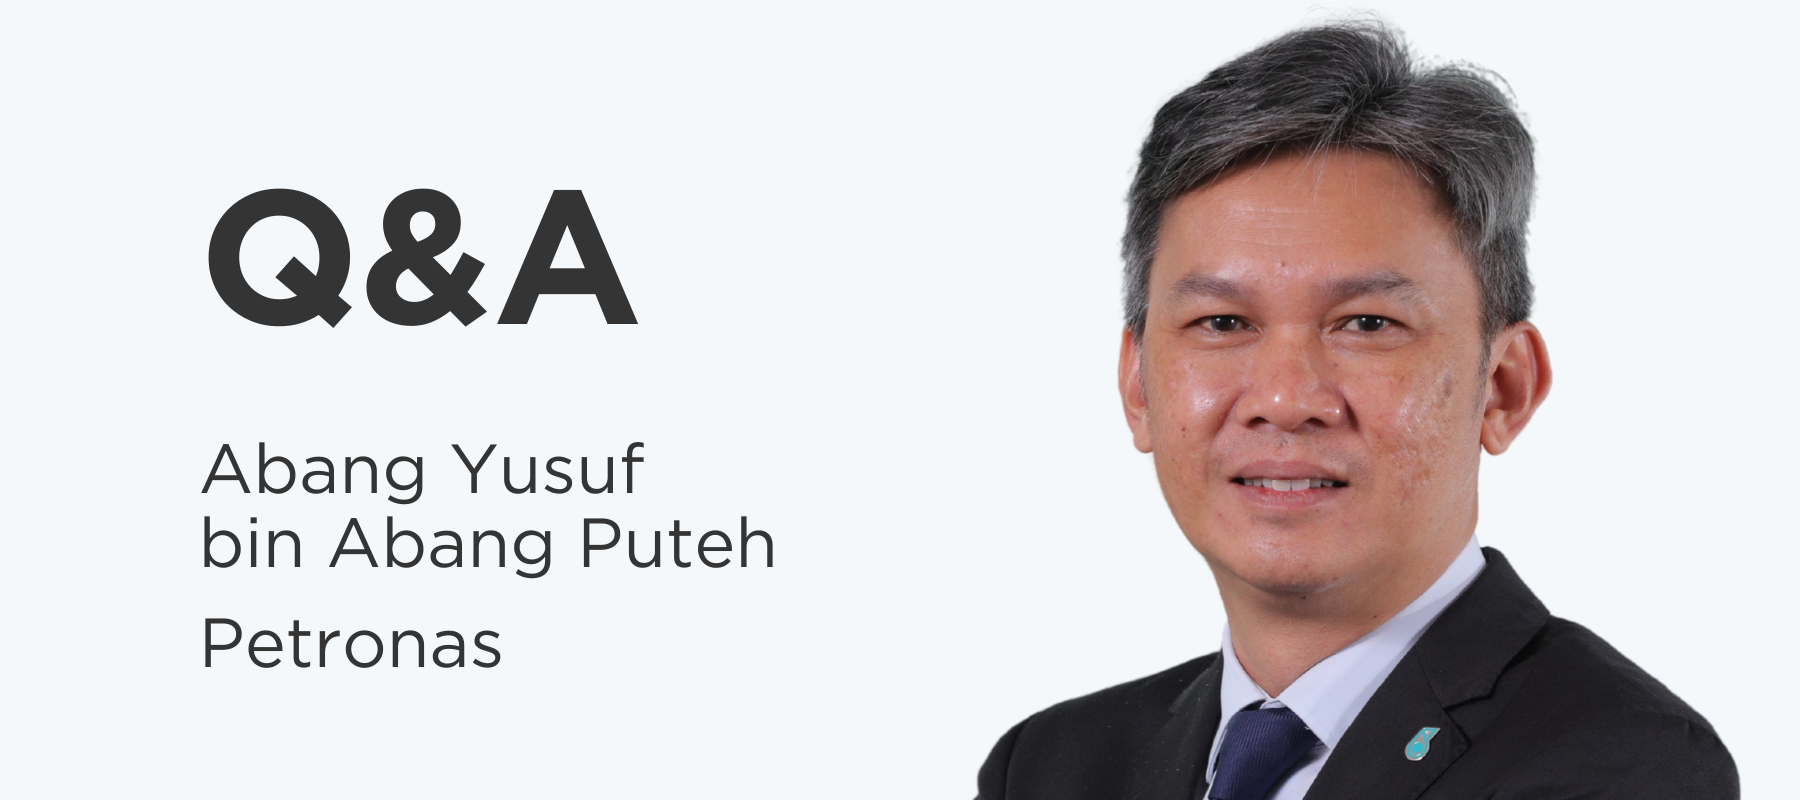 Abang Yusuf bin Abang Puteh, Senior Vice President of LNG Assets at PETRONAS’ Gas Business, discusses with NGW what should be learnt from the global energy crisis, the outlook for LNG looking forward and the contributions that the company is making towards decarbonisation.